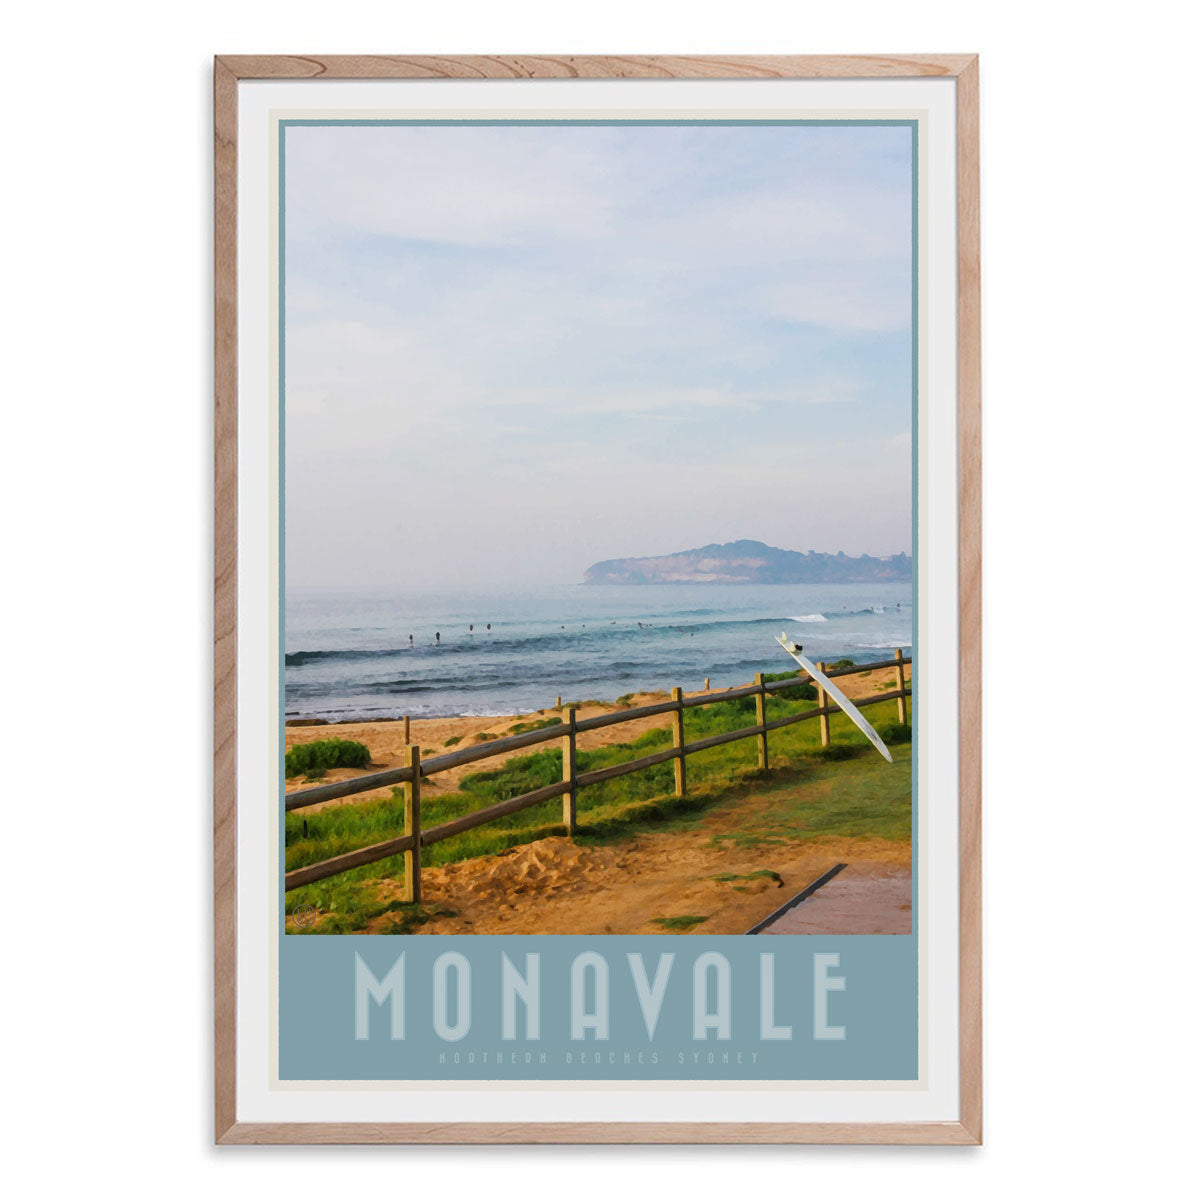 Mona Vale vintage travel style print by places we luv in oak frame